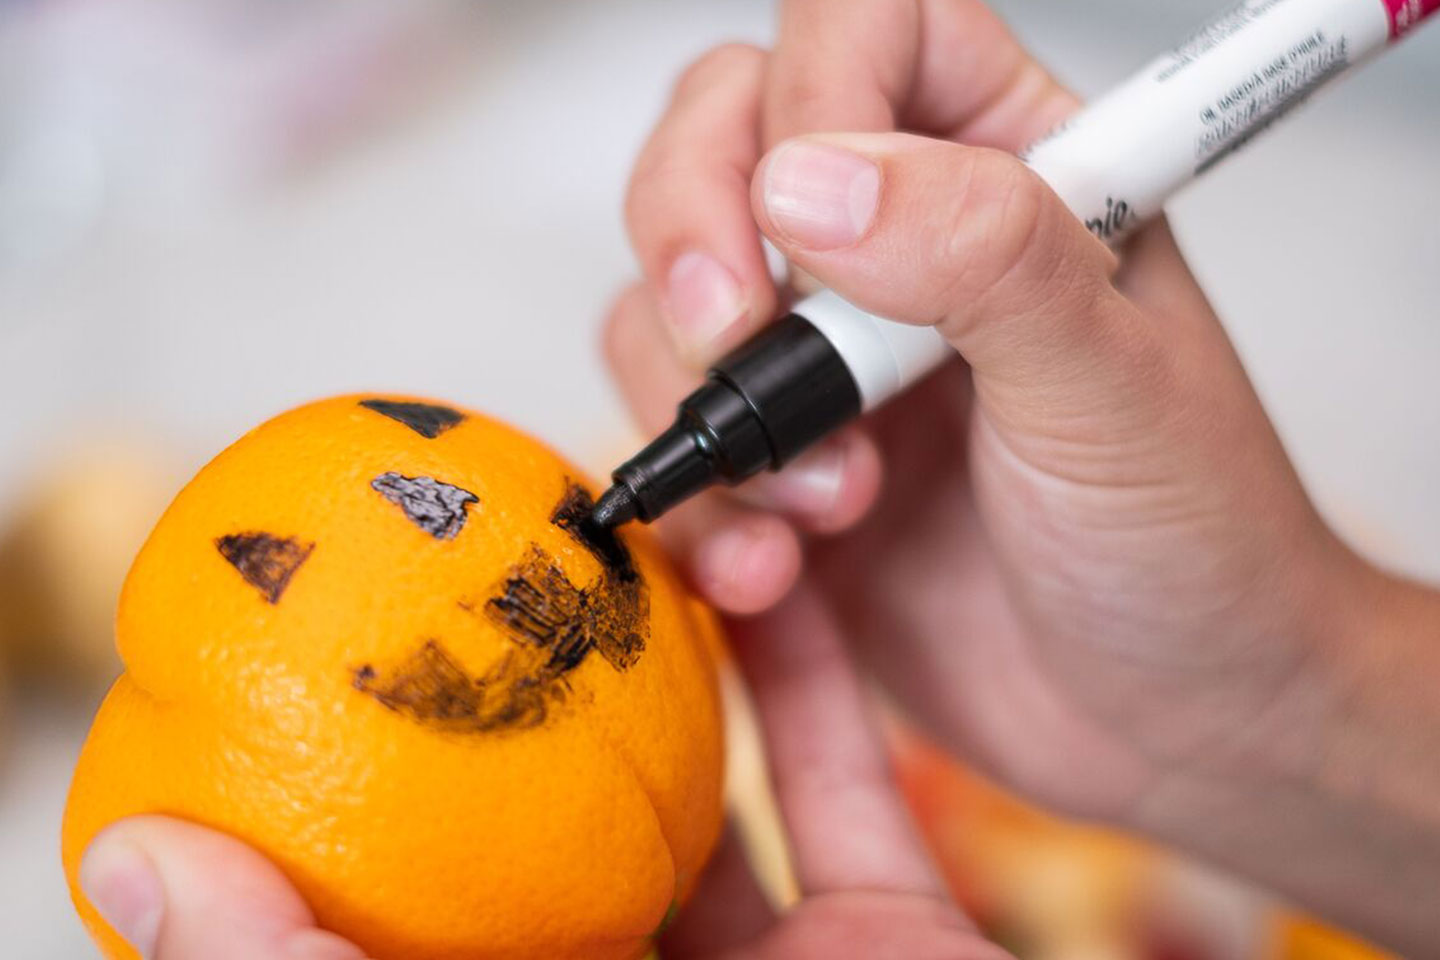 Person drawing a jack-o'-lantern face on the outside of the mandarin orange